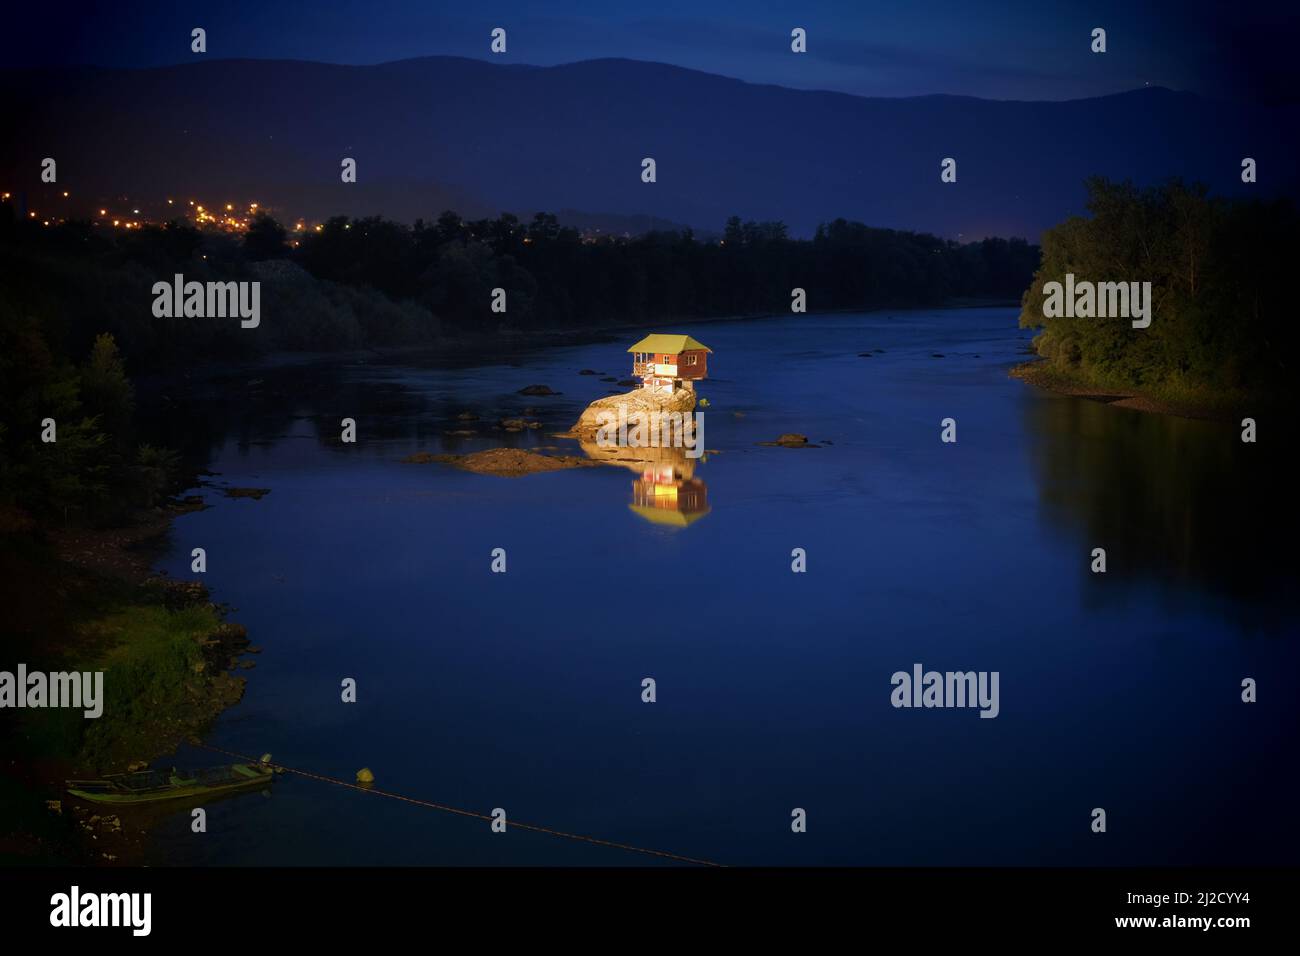 wooden house on river by night, Serbia Stock Photo